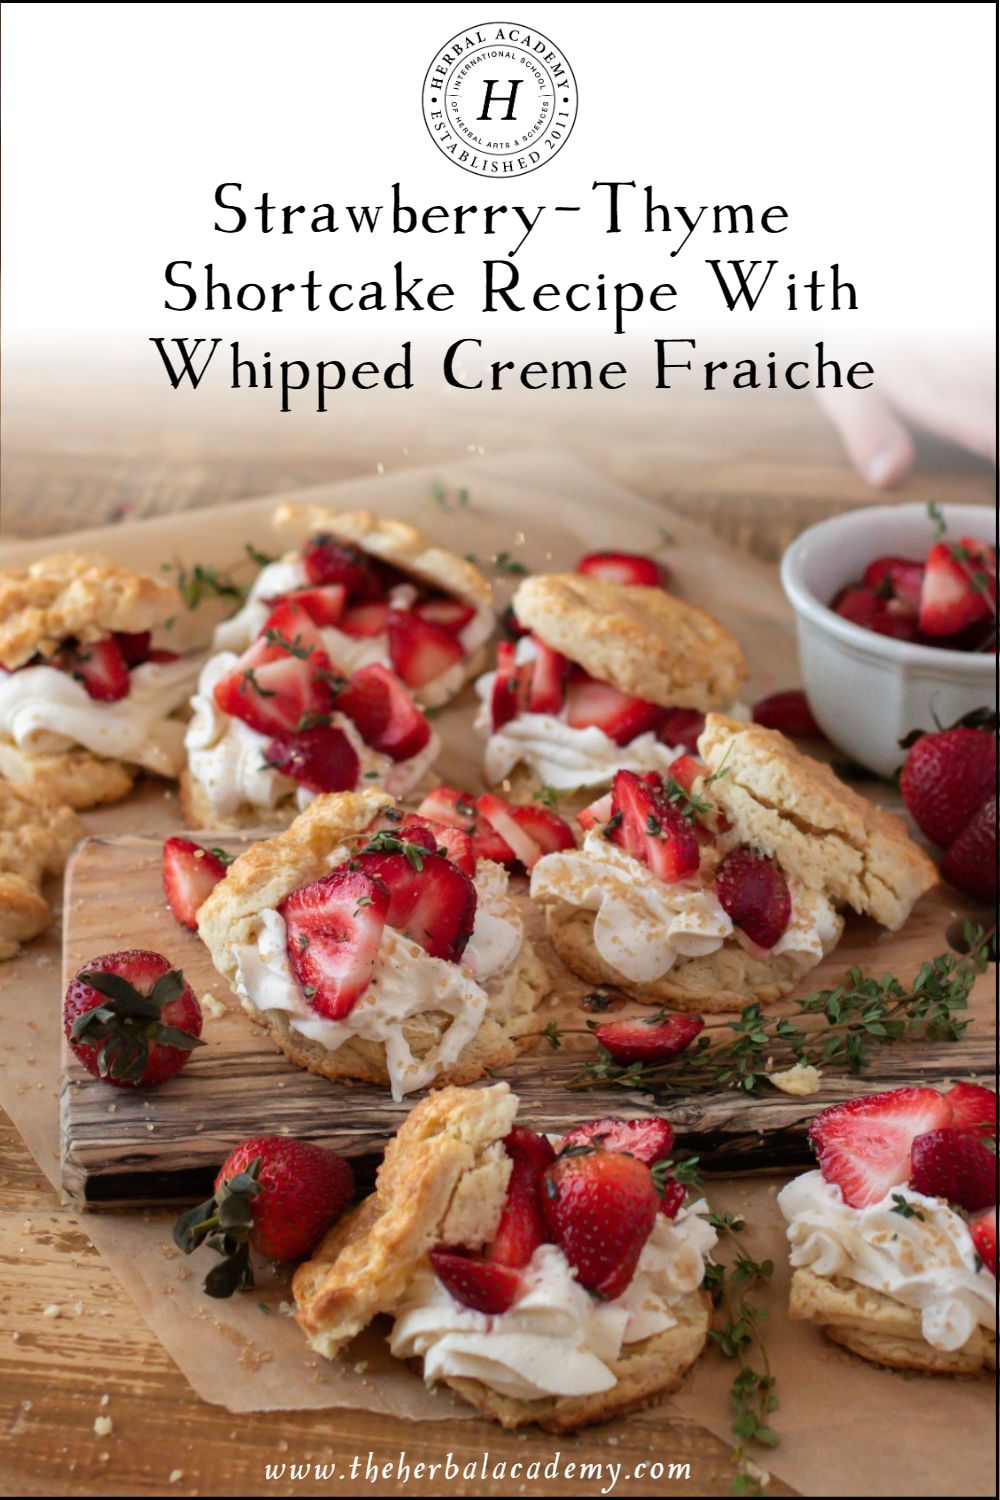 Strawberry-Thyme Shortcake Recipe With Whipped Crème Fraîche | Herbal Academy | The addition of fresh thyme in this shortcake recipe creates an herbal flavor that feels like your dessert came straight out of the garden.